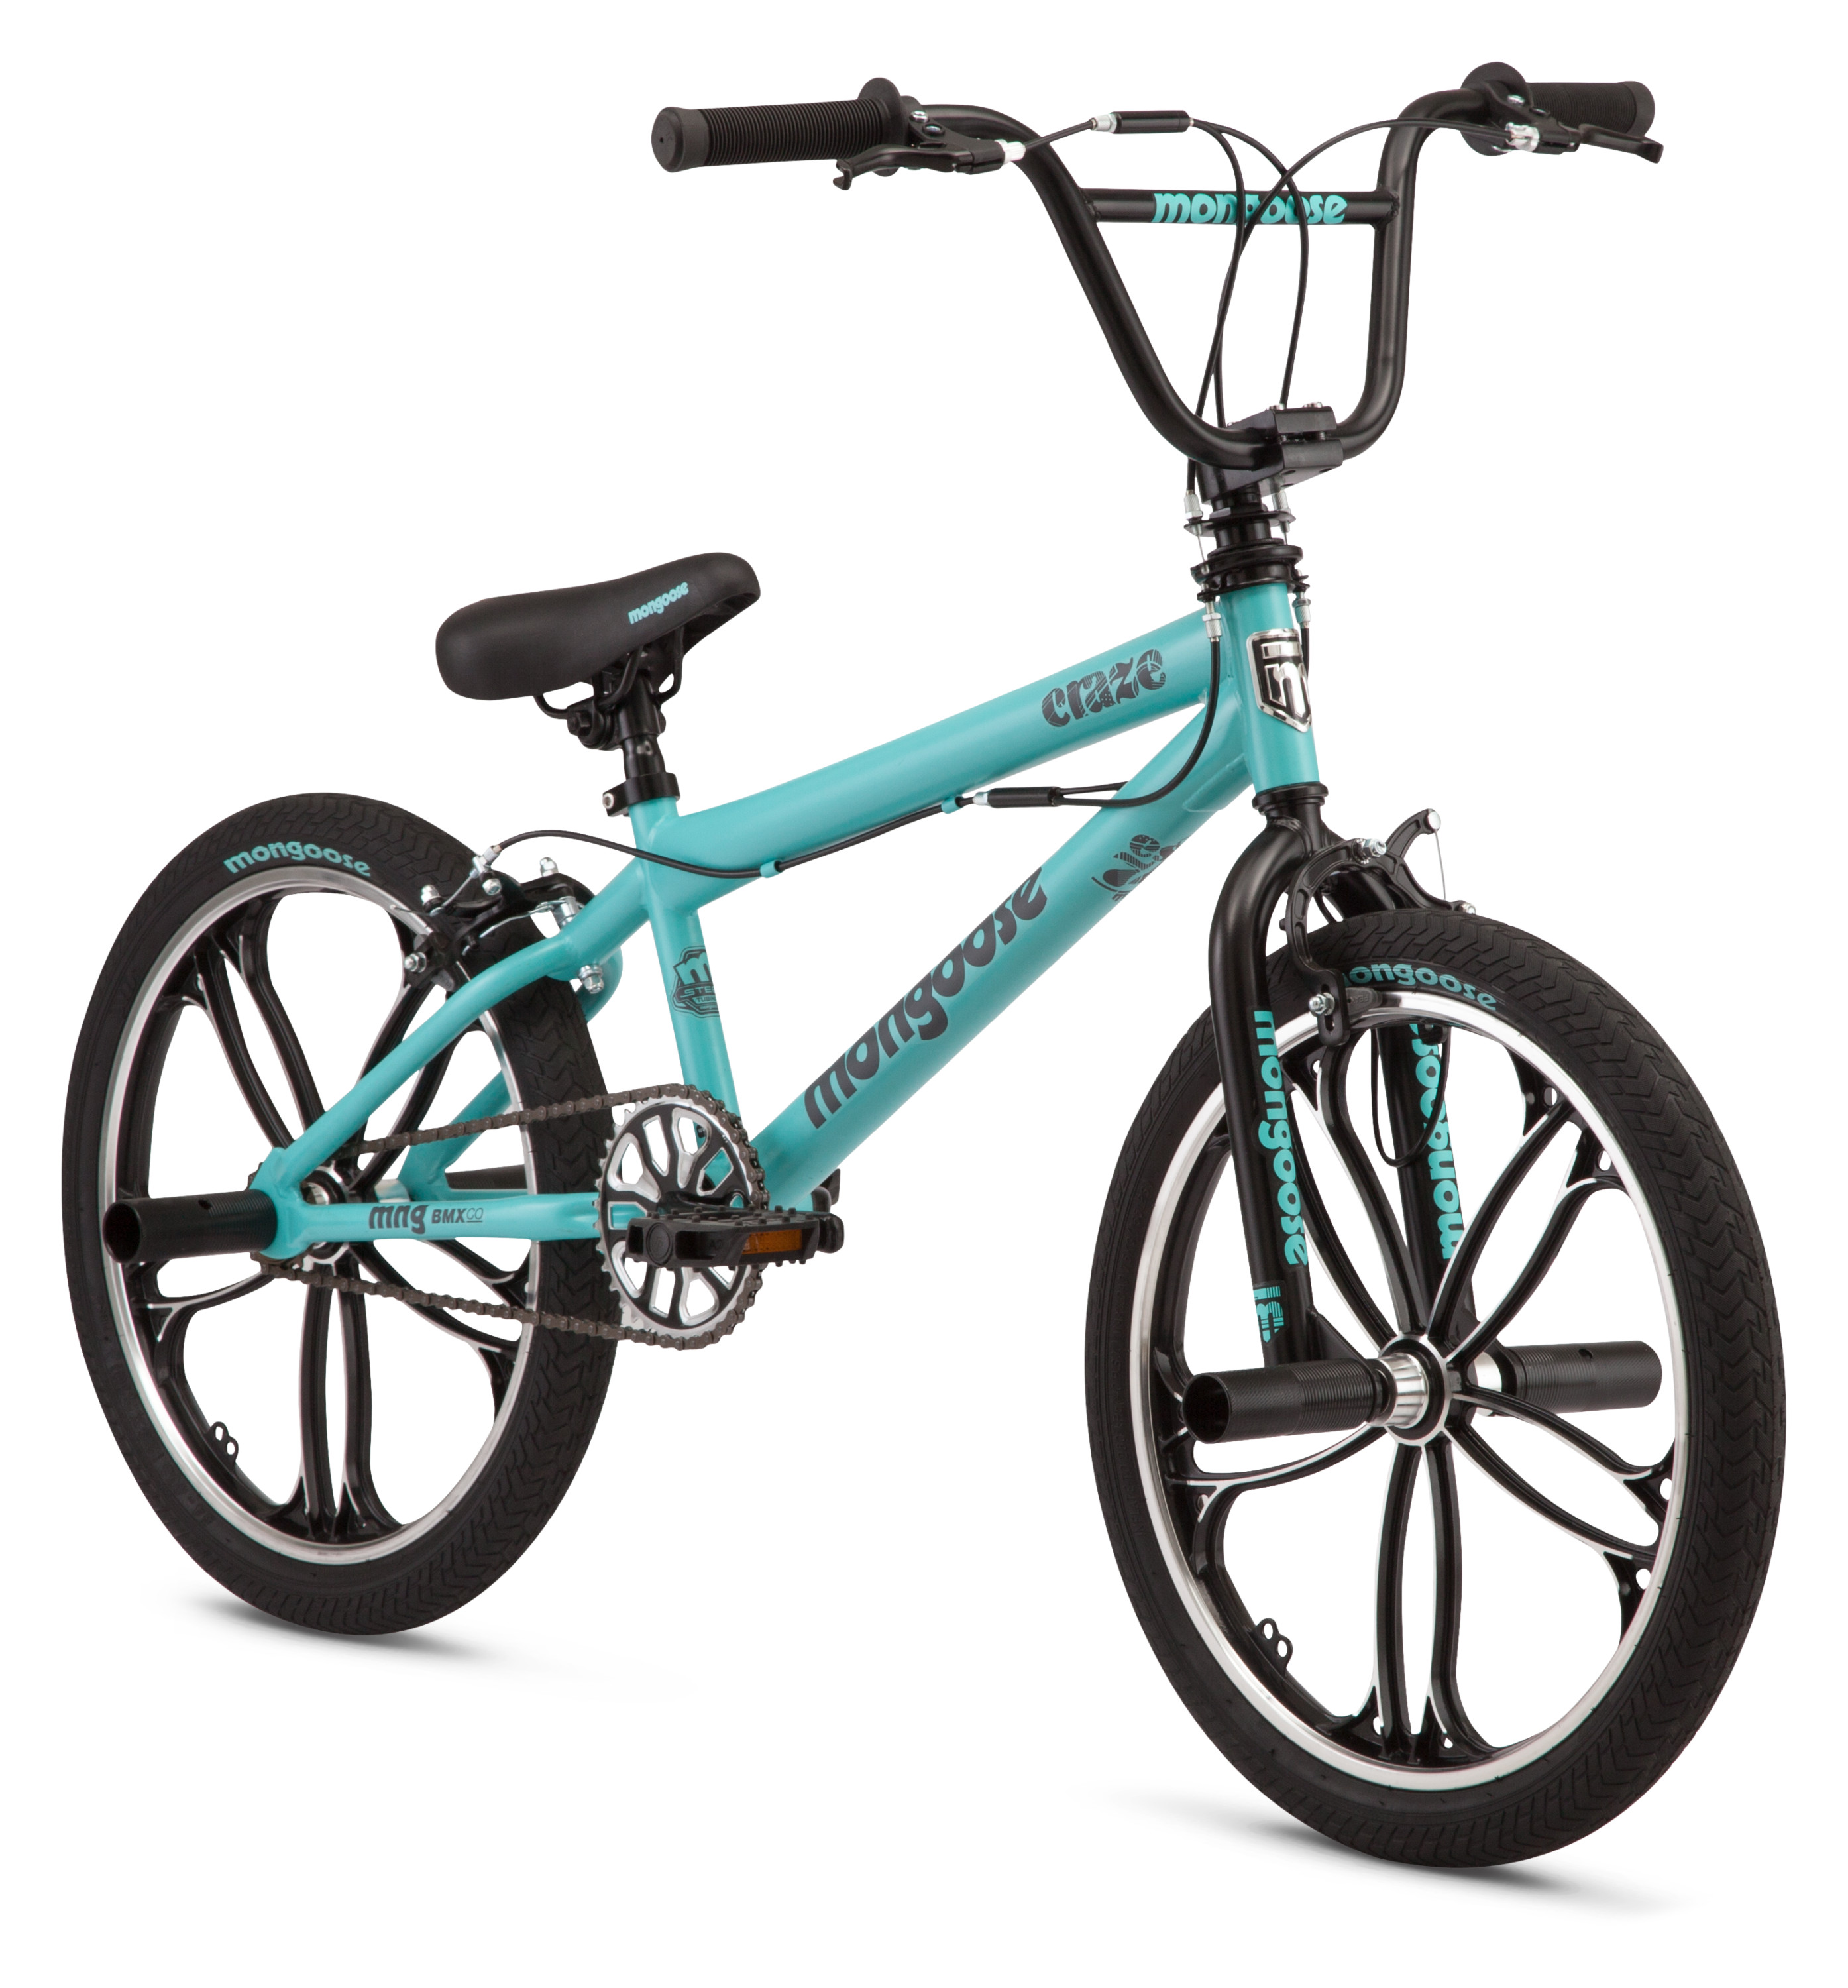 Mongoose Craze Boys and Girls 20 inch Kids BMX Bike, Ages 6+, Black and Mint - image 3 of 10